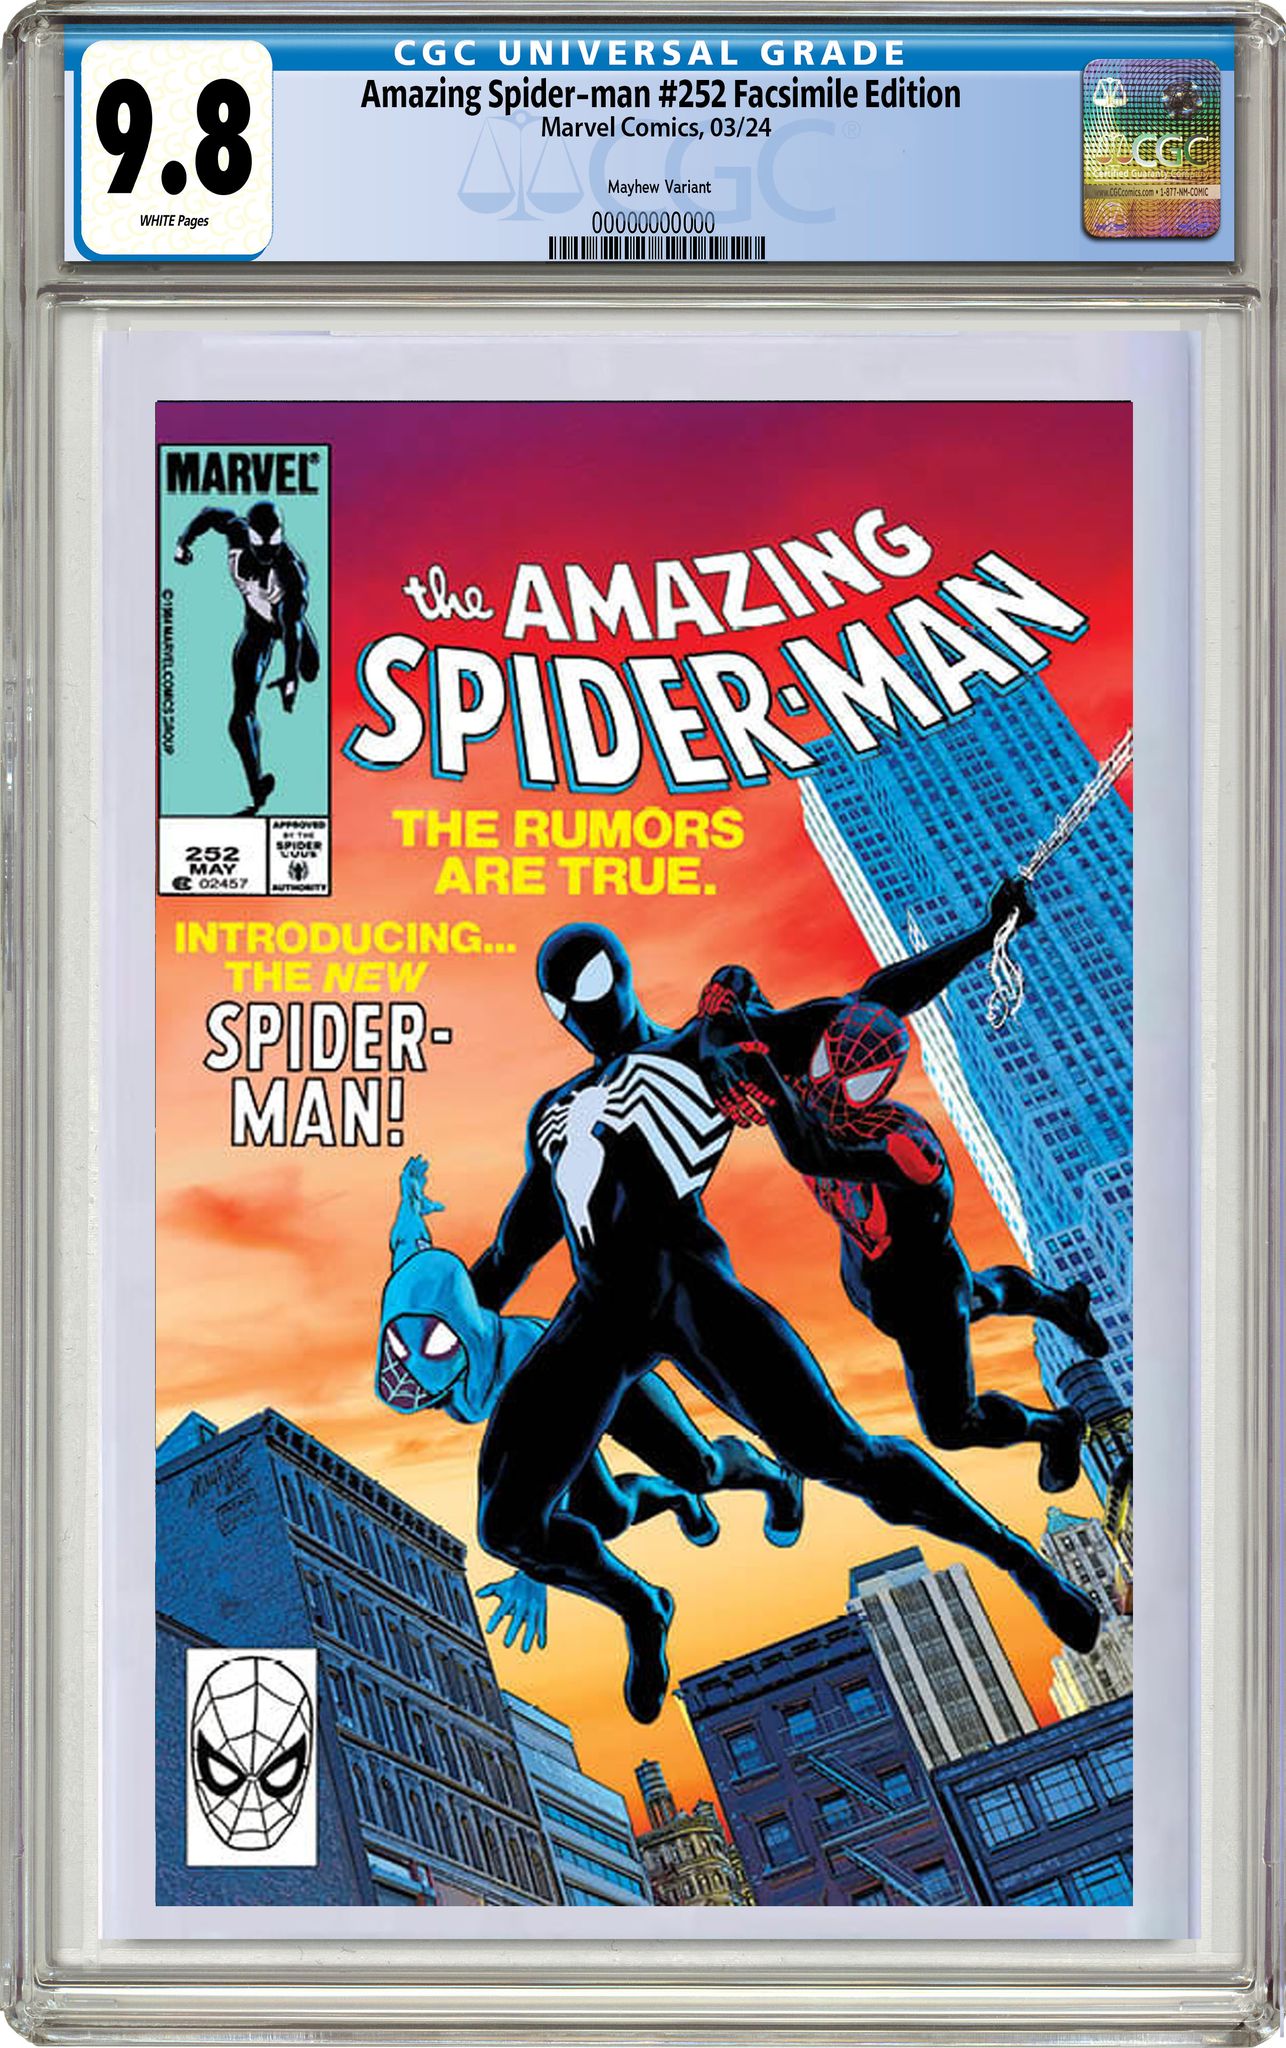 AMAZING SPIDER-MAN 252 FACSIMILE EDITION MIKE MAYHEW EXCLUSIVE VARIANT - 01/31/24